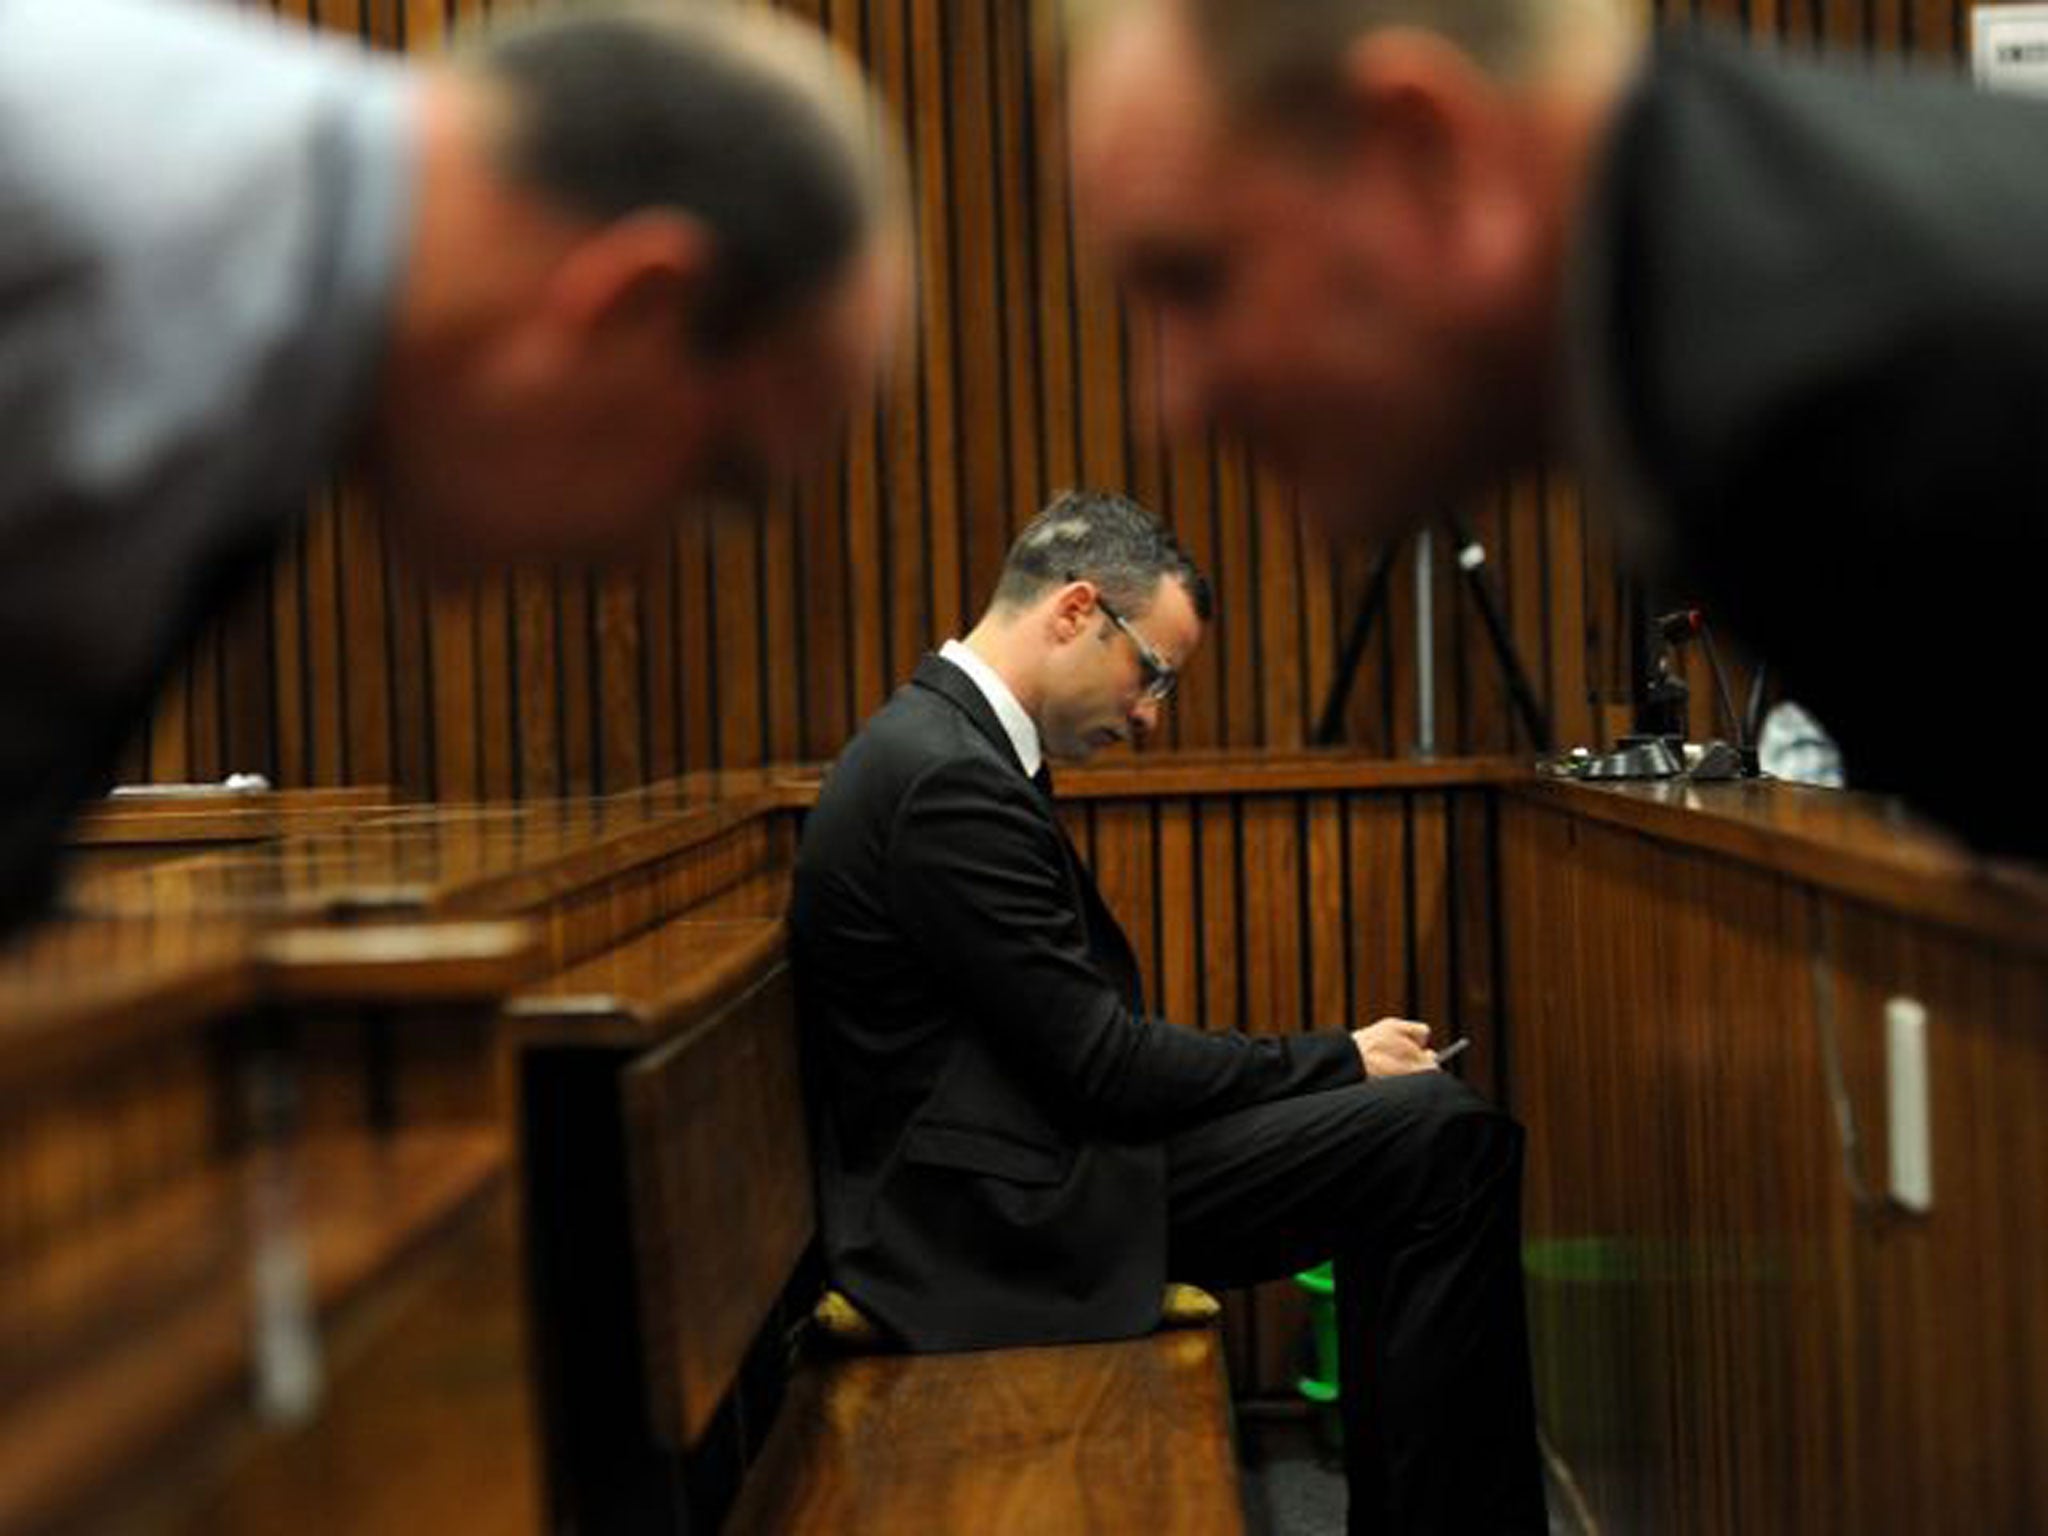 The defence for Oscar Pistorius will now open on 7 April